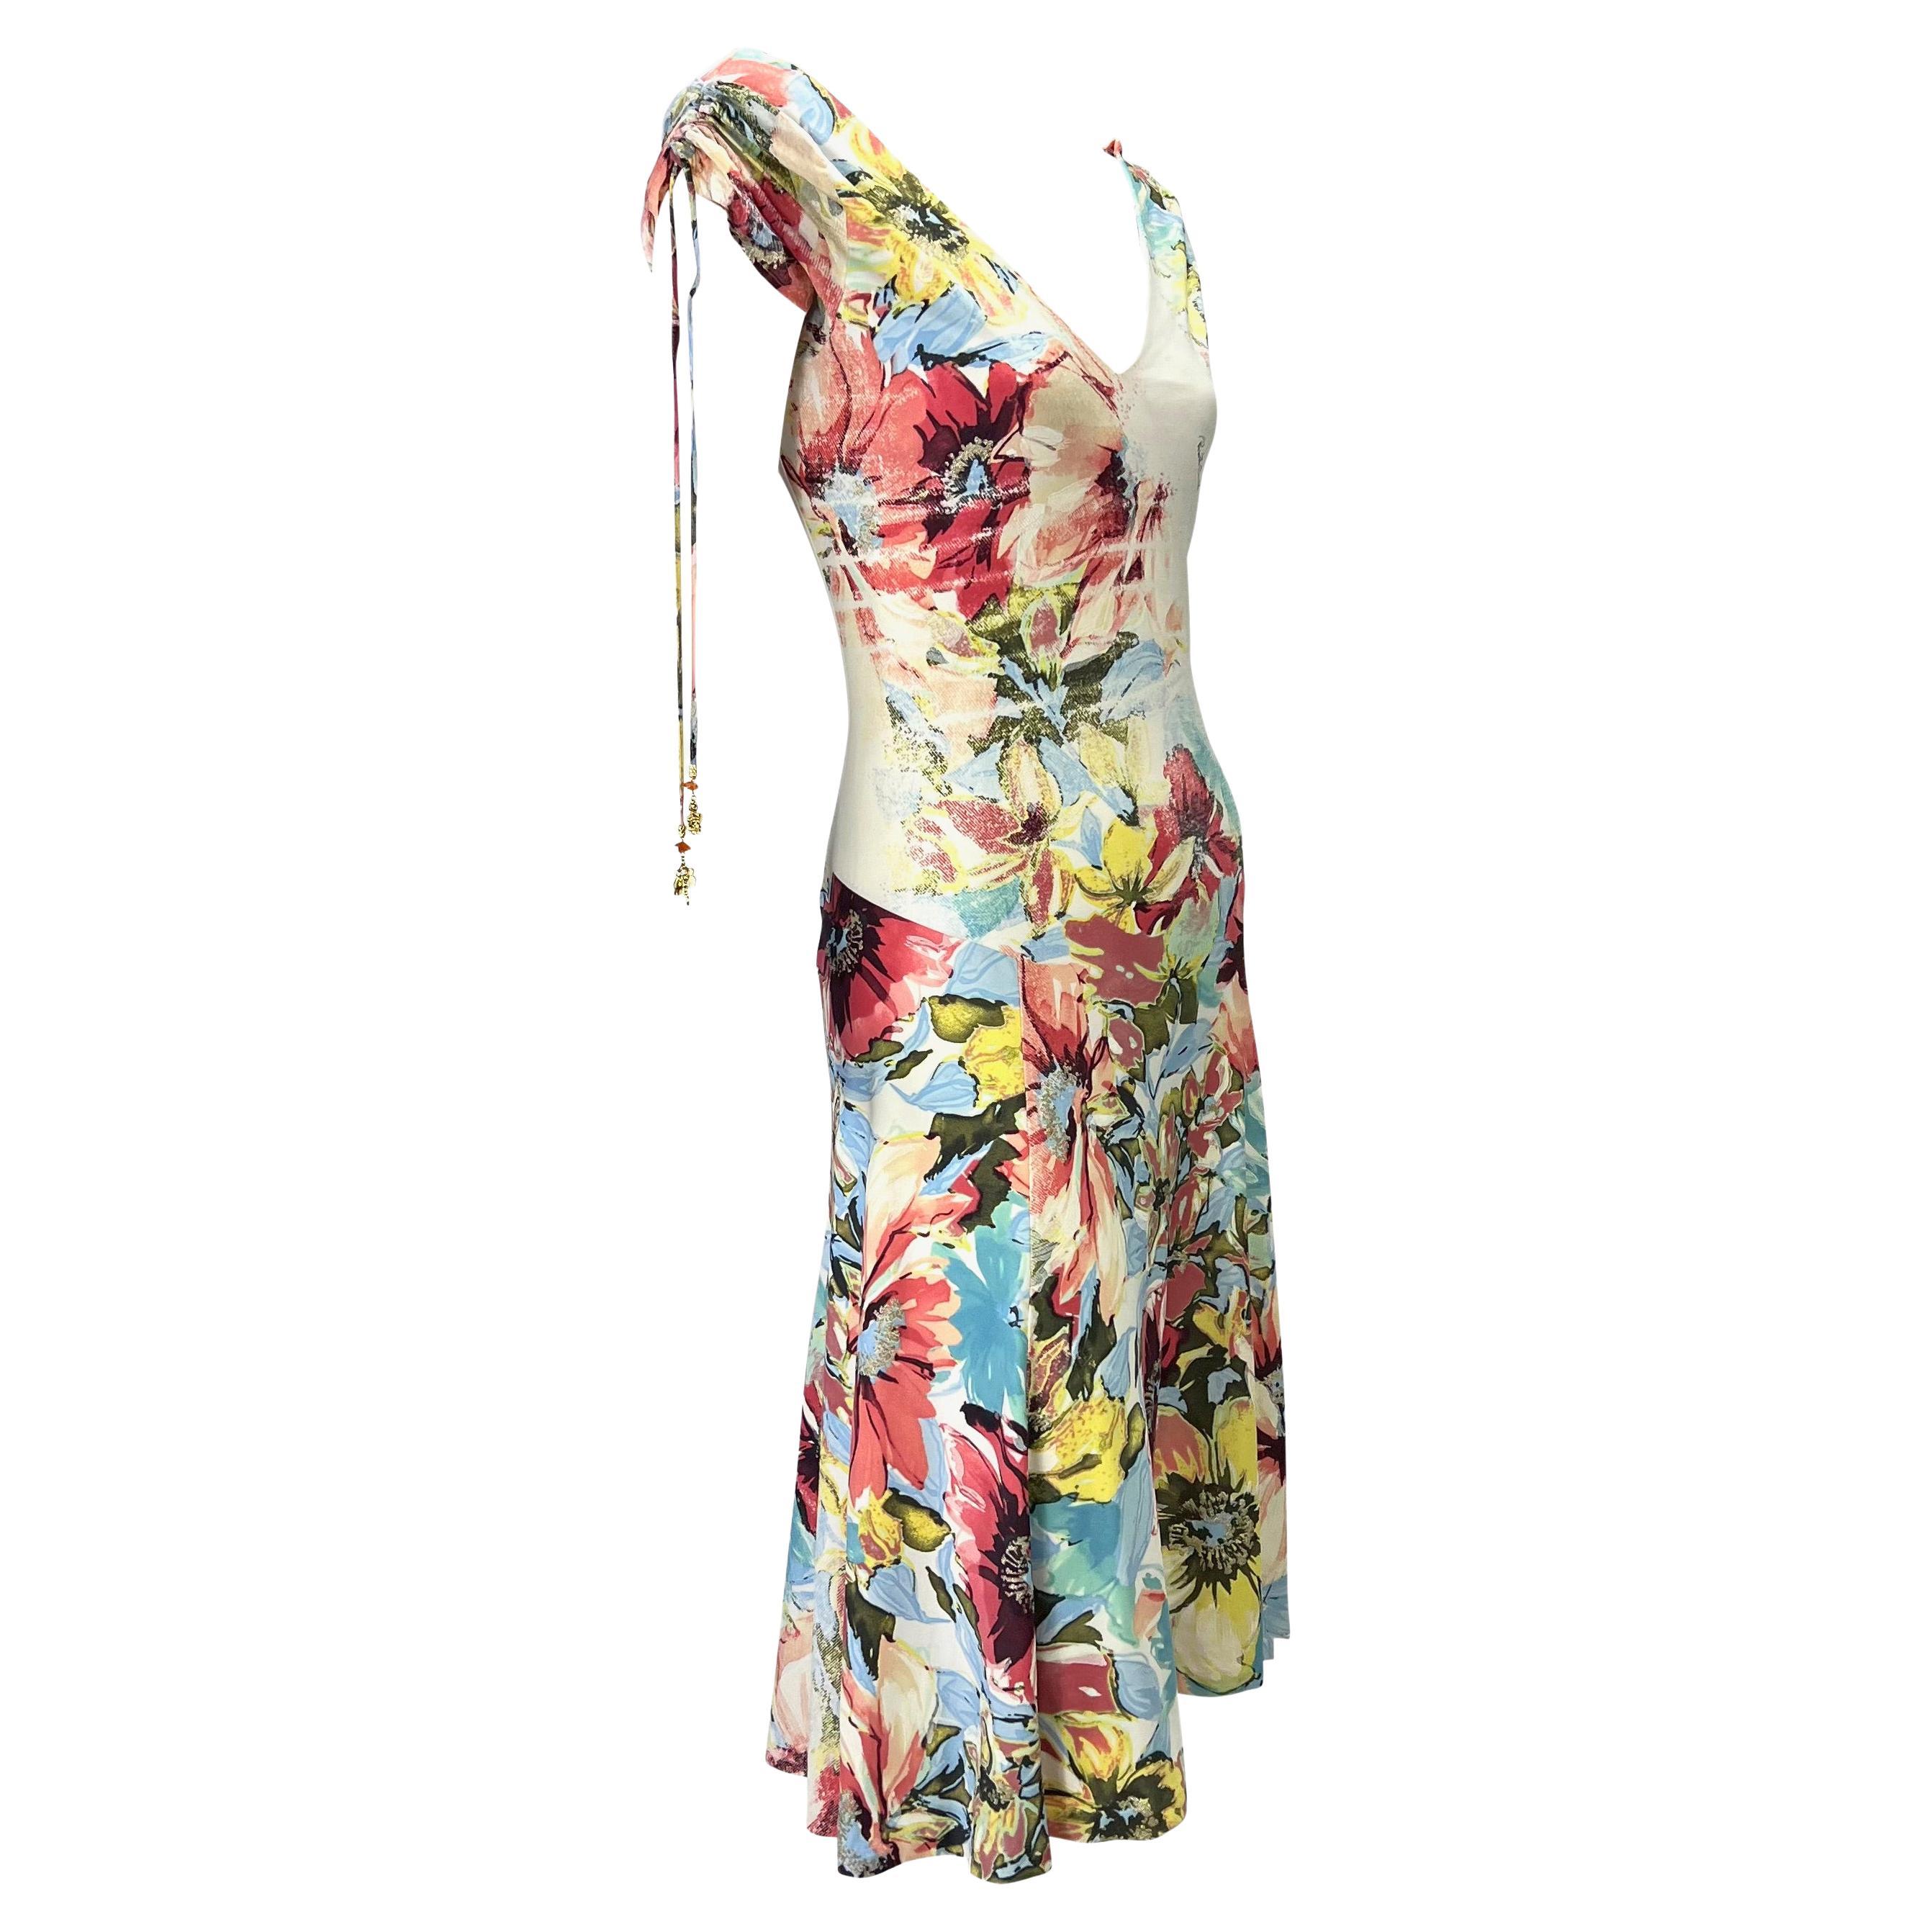 S/S 2003 Roberto Cavalli Floral Abstract Watercolor Viscose Stretch Charm Dress For Sale 1